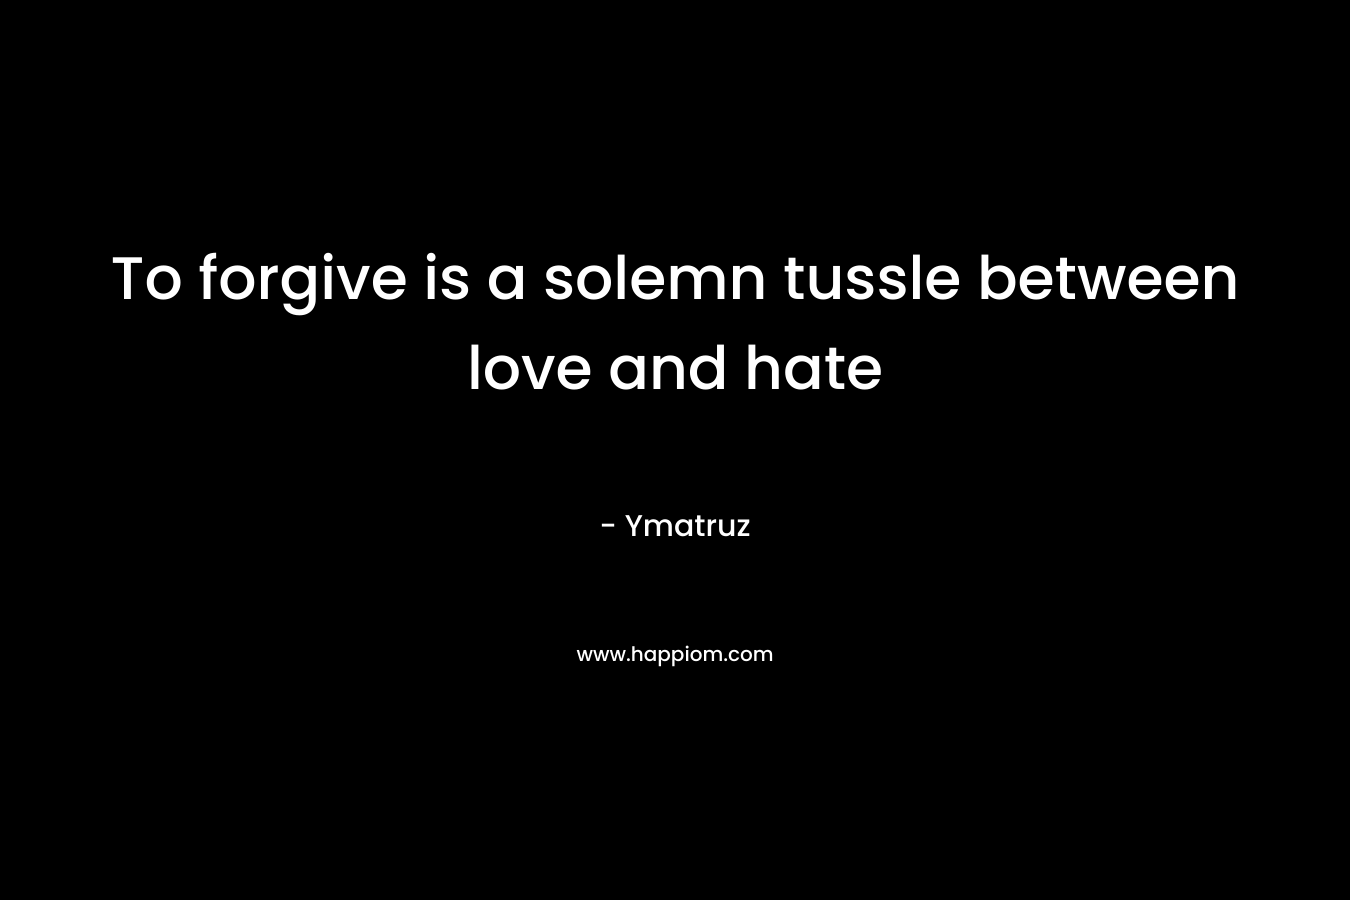 To forgive is a solemn tussle between love and hate